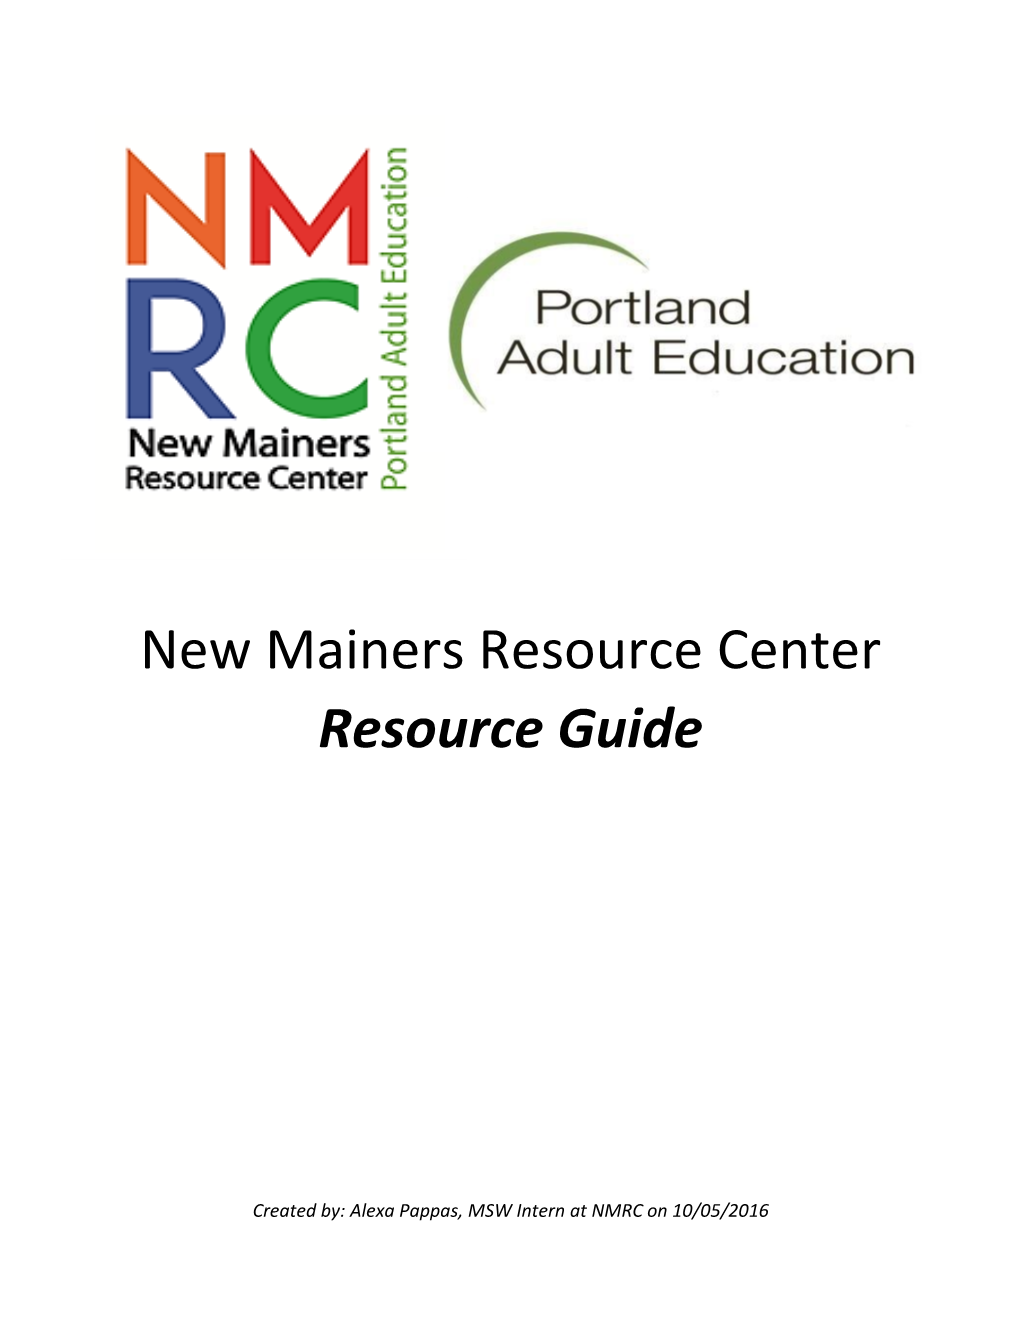 New Mainers Resource Center Resource Guide